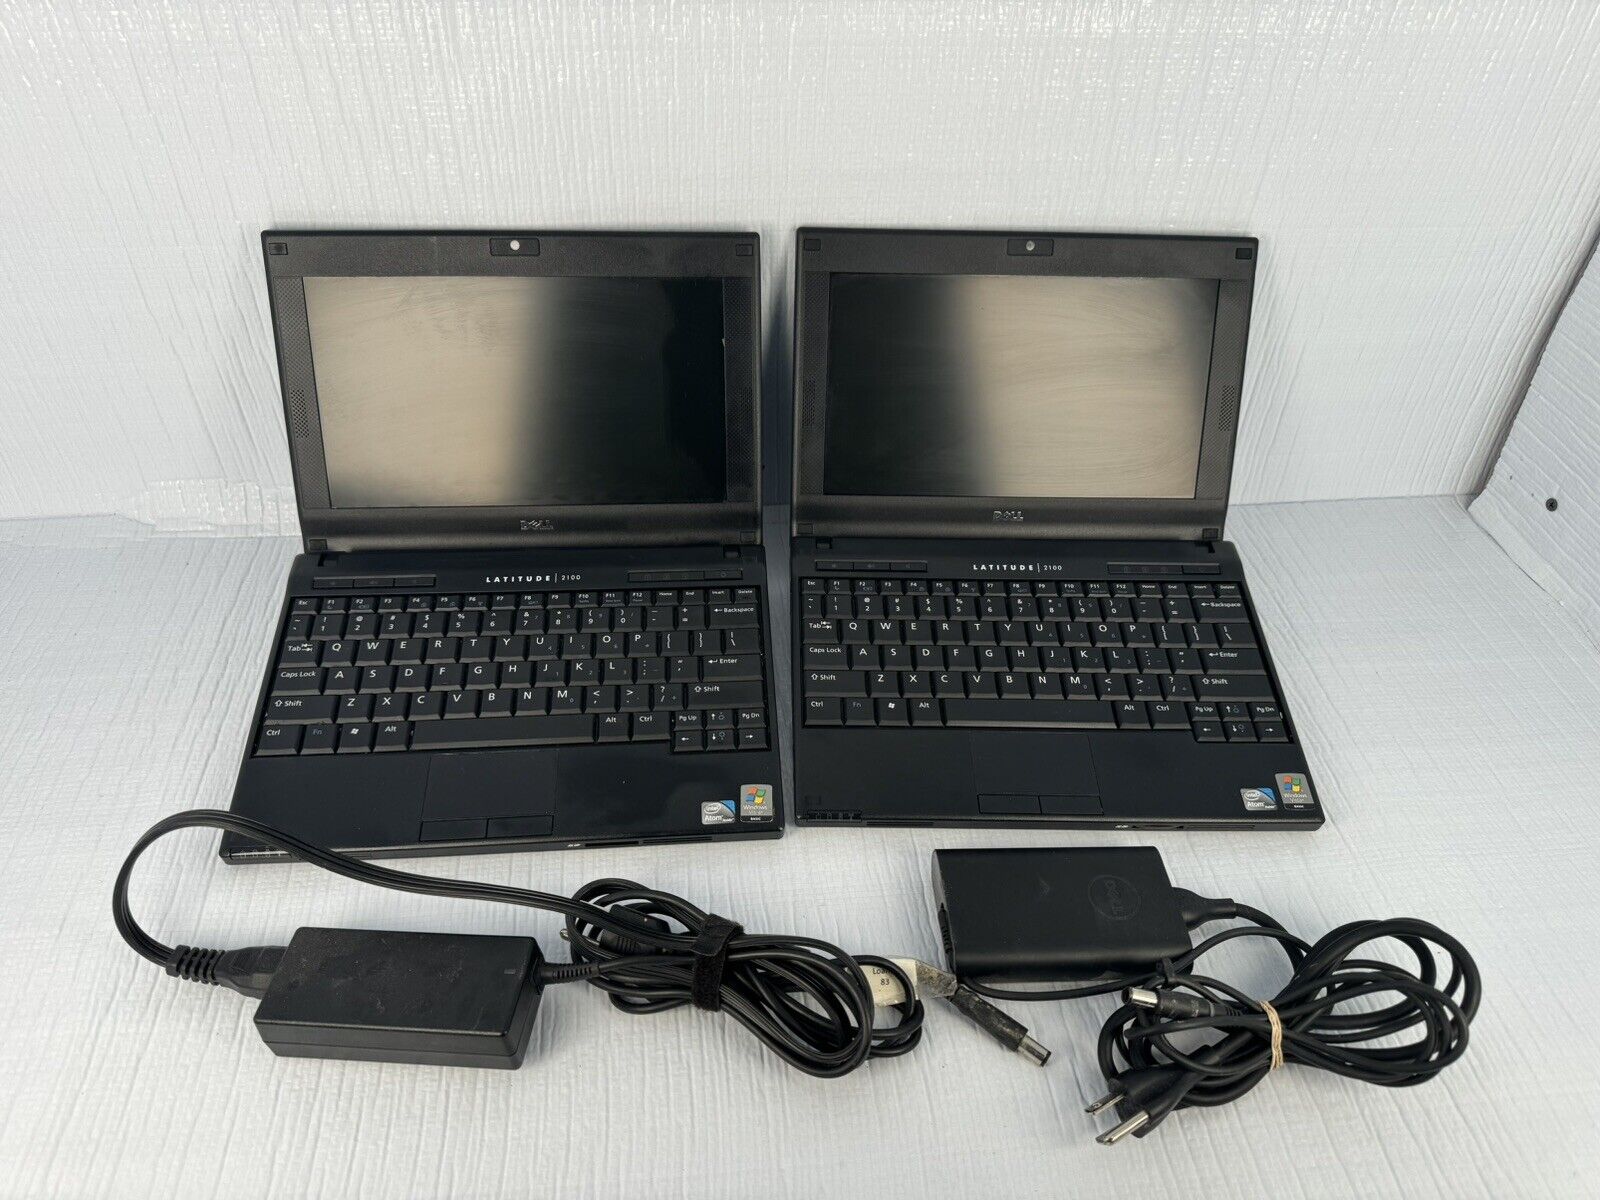 Lot Of 2 With Chargers 10.1” Dell Latitude 2100 Intel Atom 1.60GHz 2GB 80GB